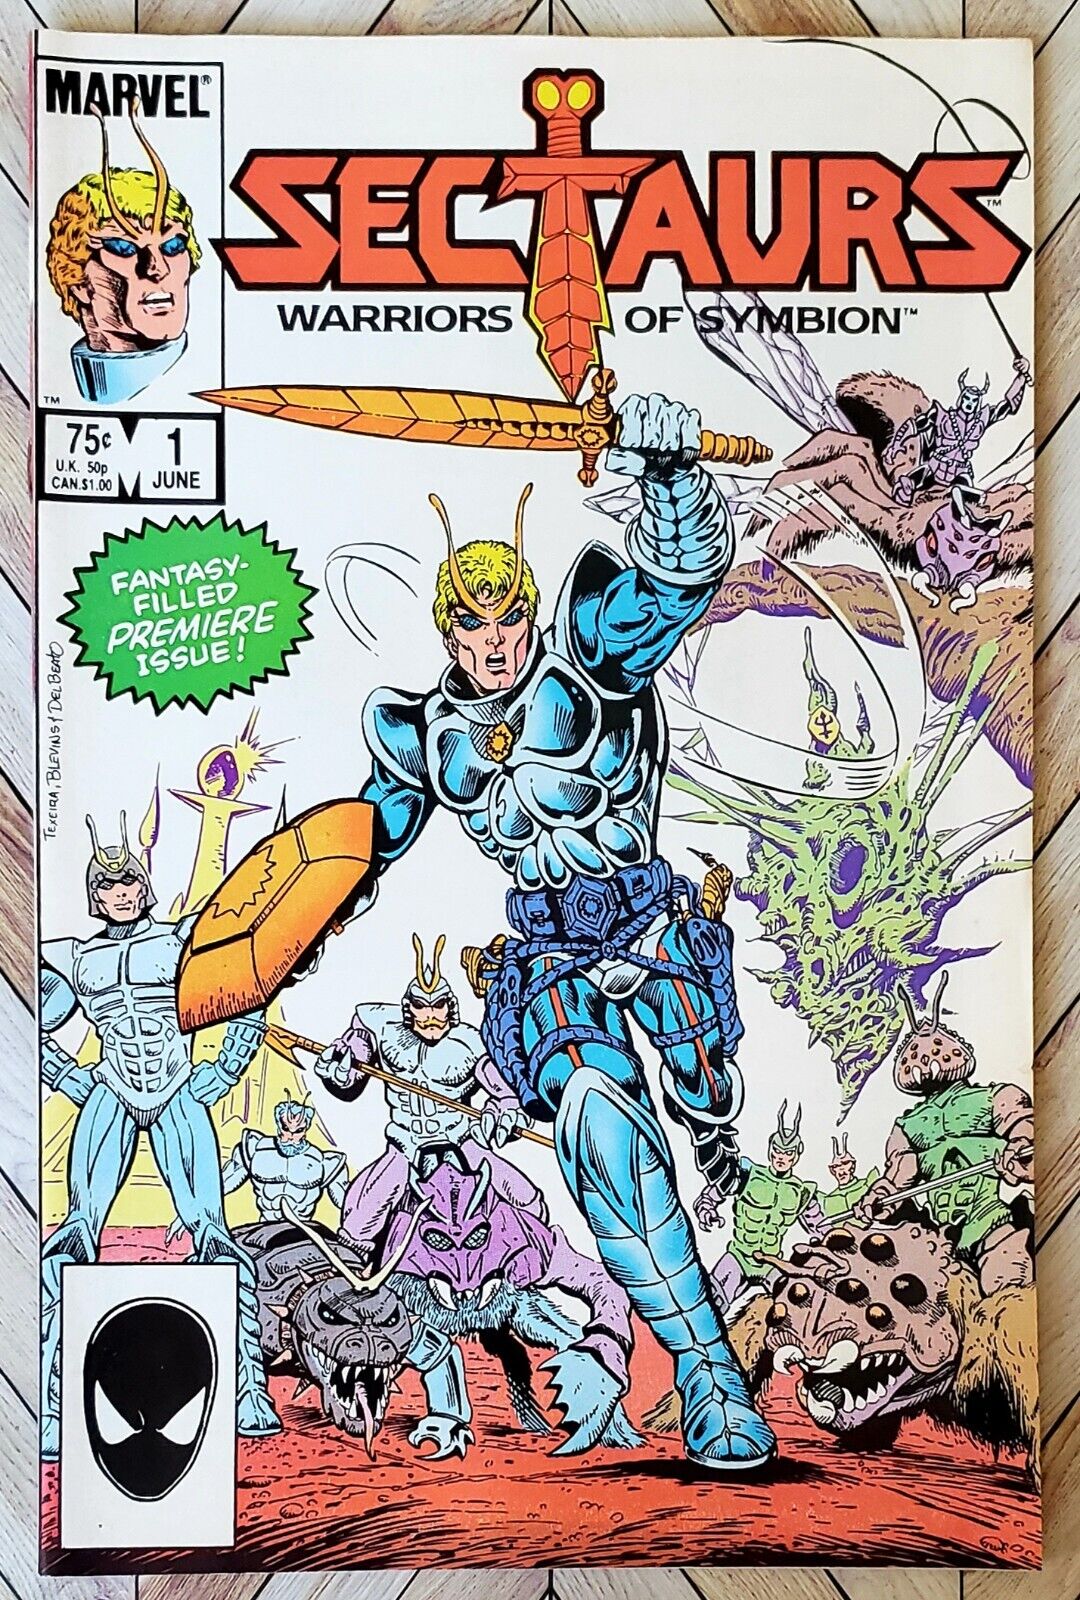 Sectaurs # 1 - NM- 1985 - Marvel Comics - Warriors Of Symbion - Nice.